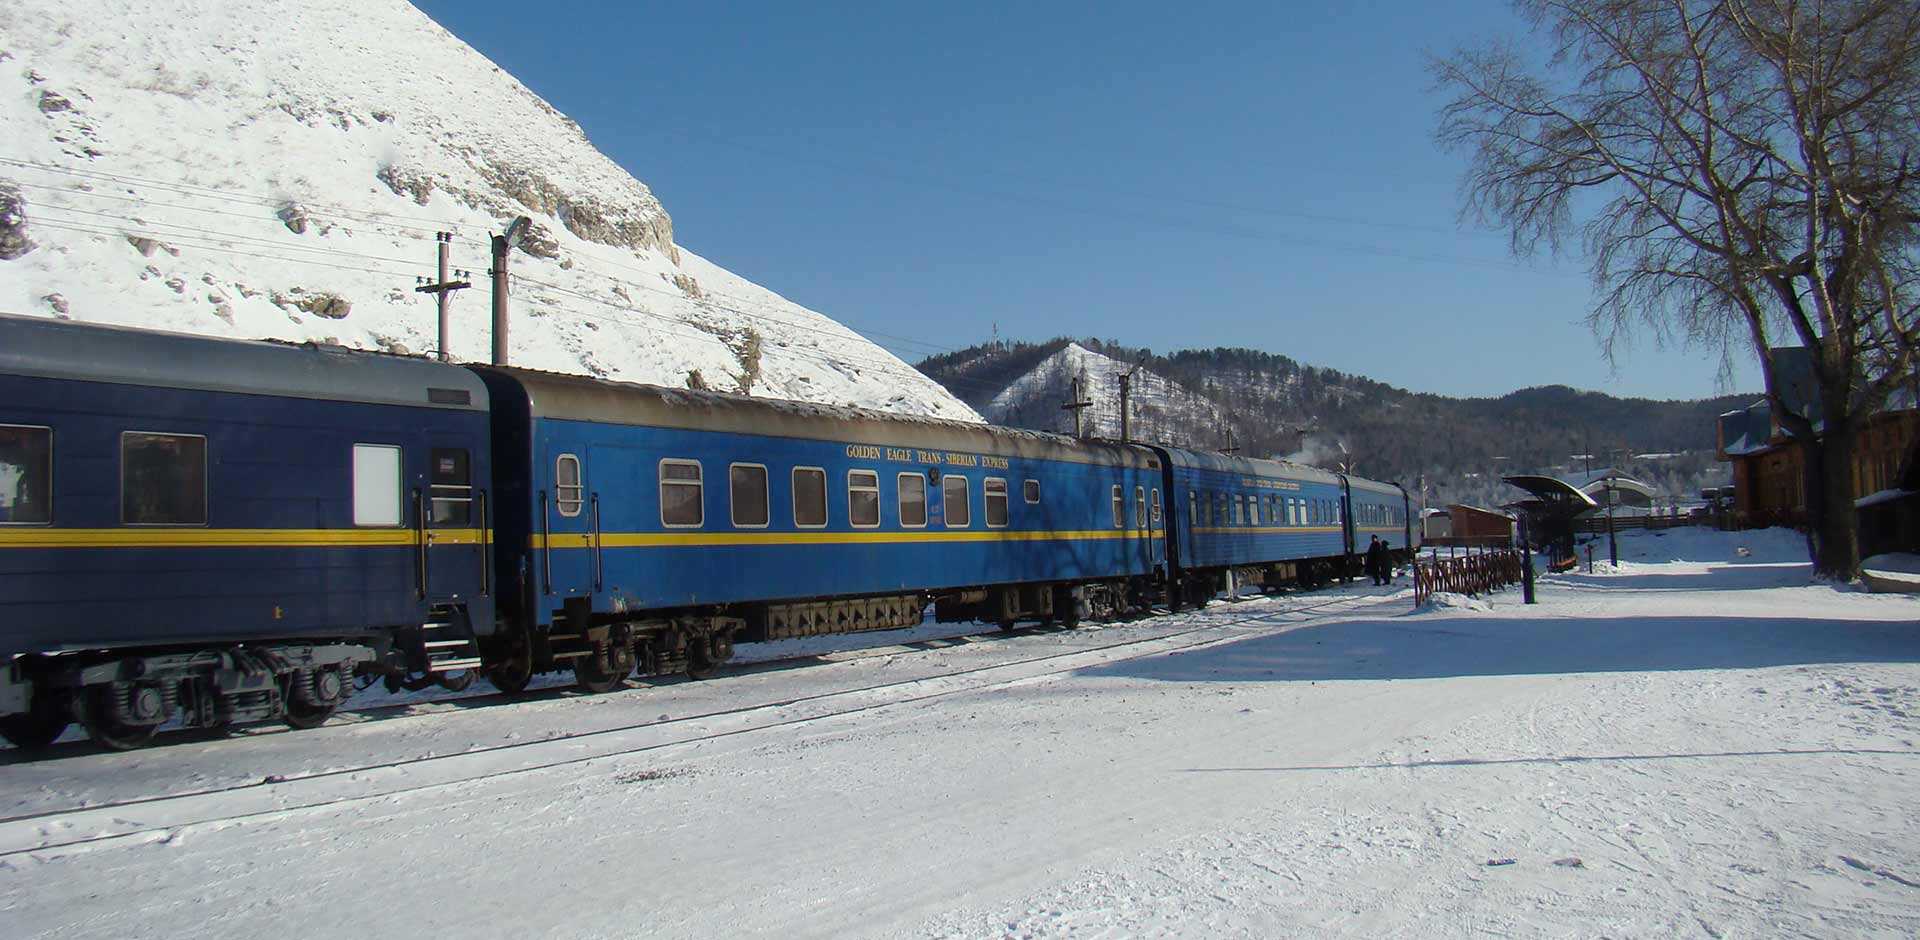 Orient express, China's grand plan for a New Silk Road